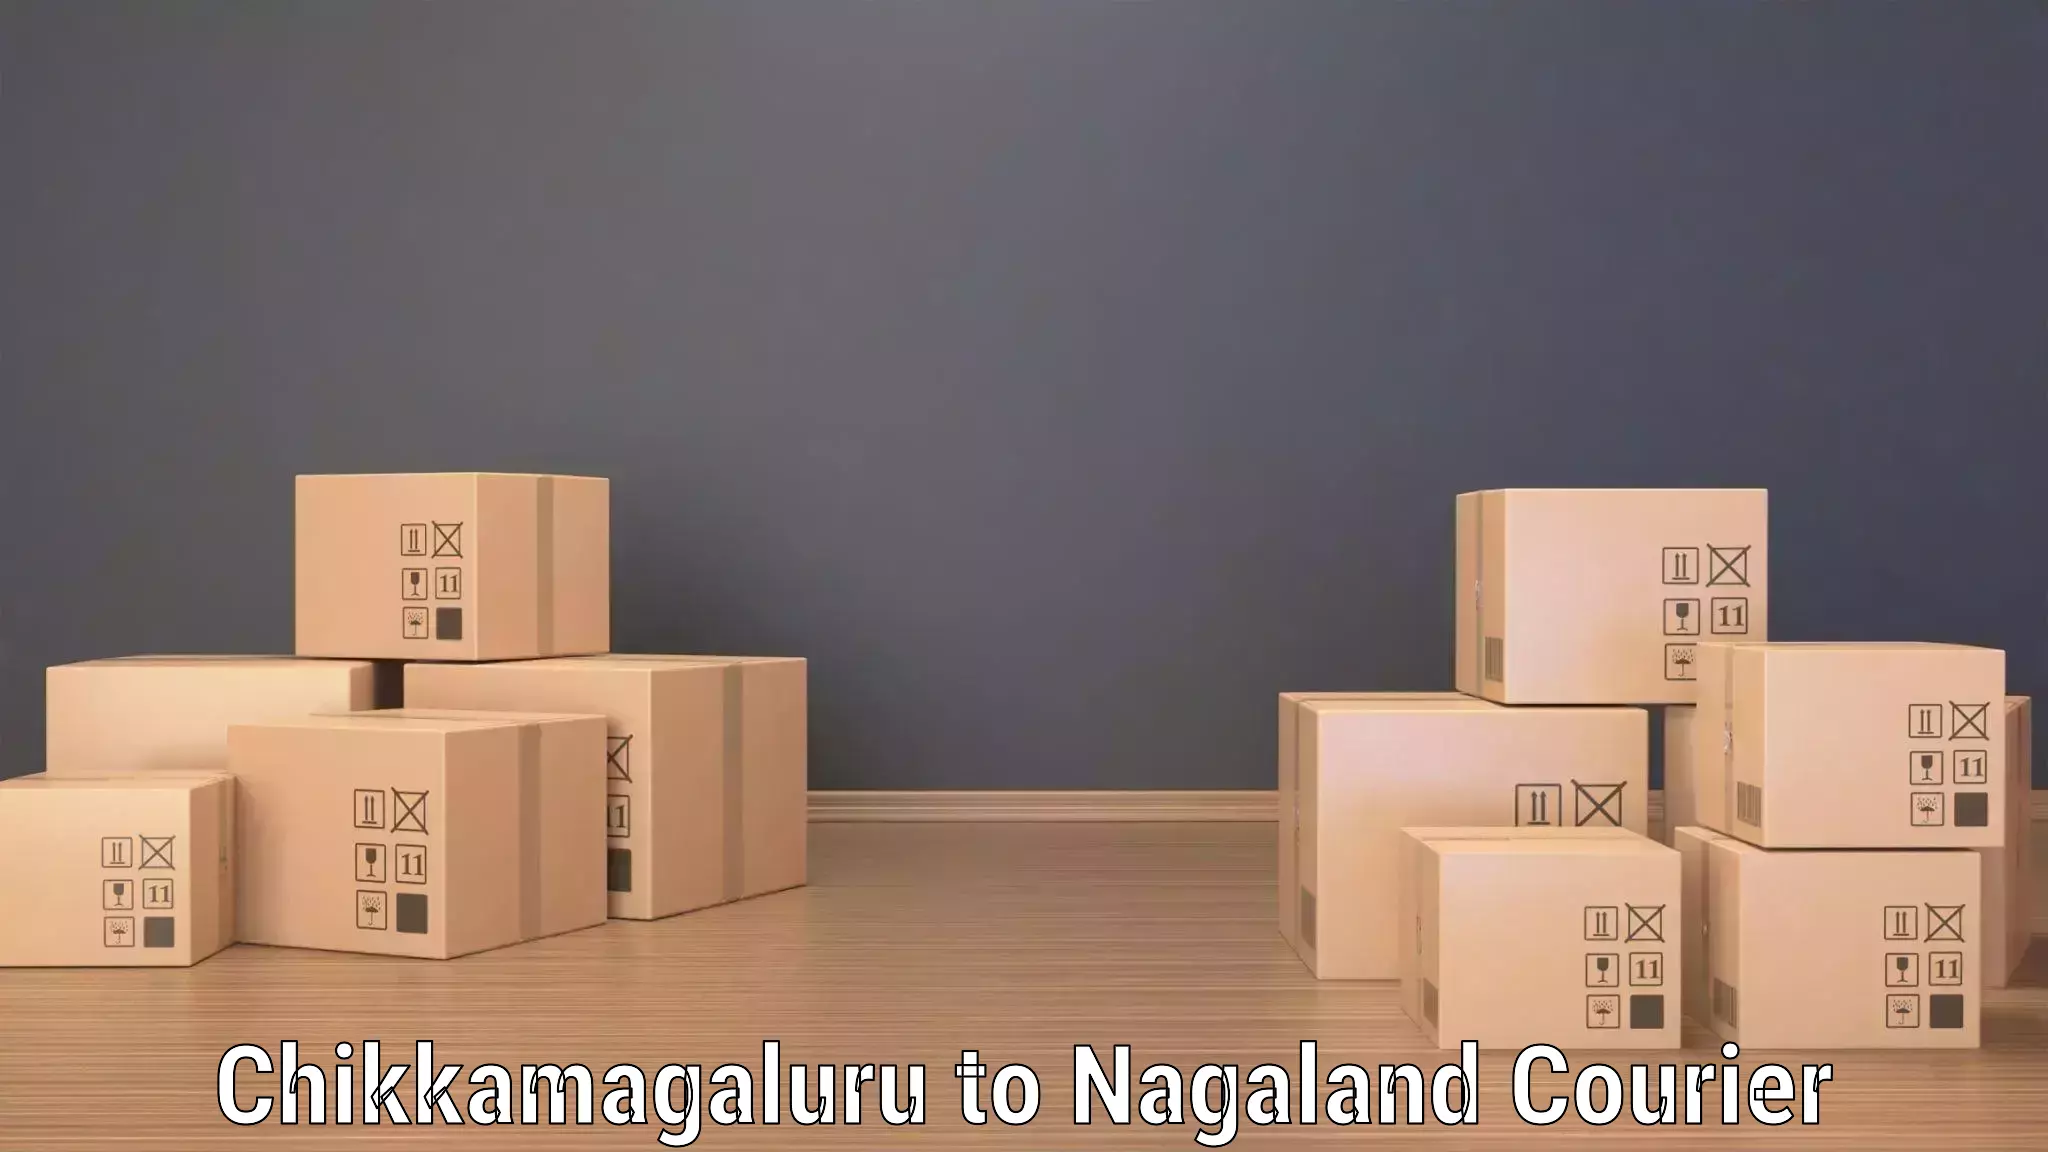 Express package delivery in Chikkamagaluru to Nagaland